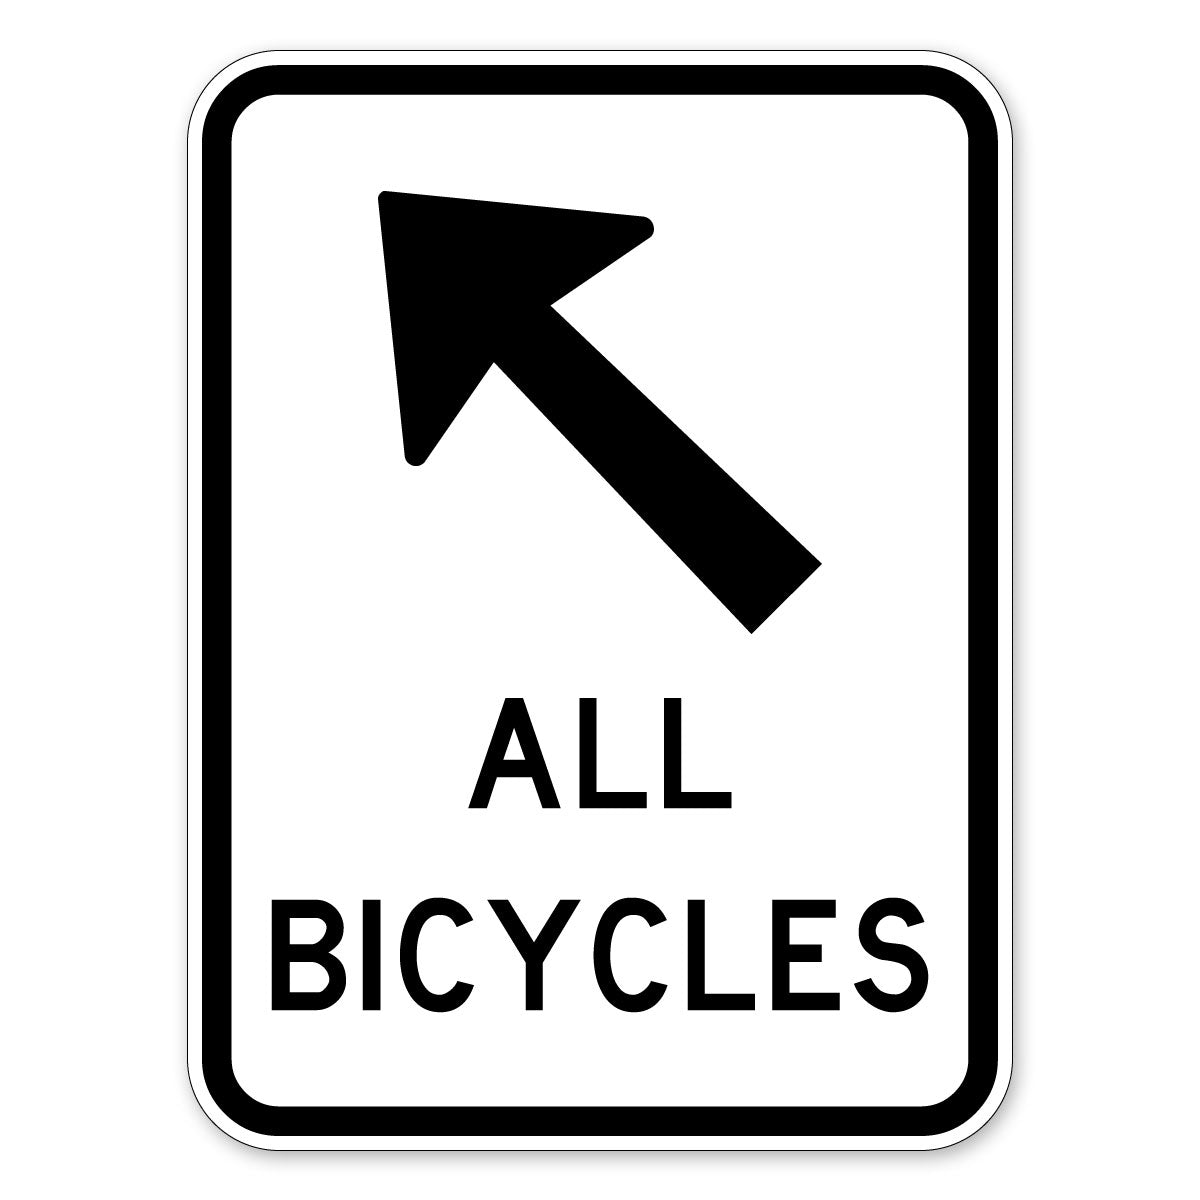 All Bicycles + Arrow Sign